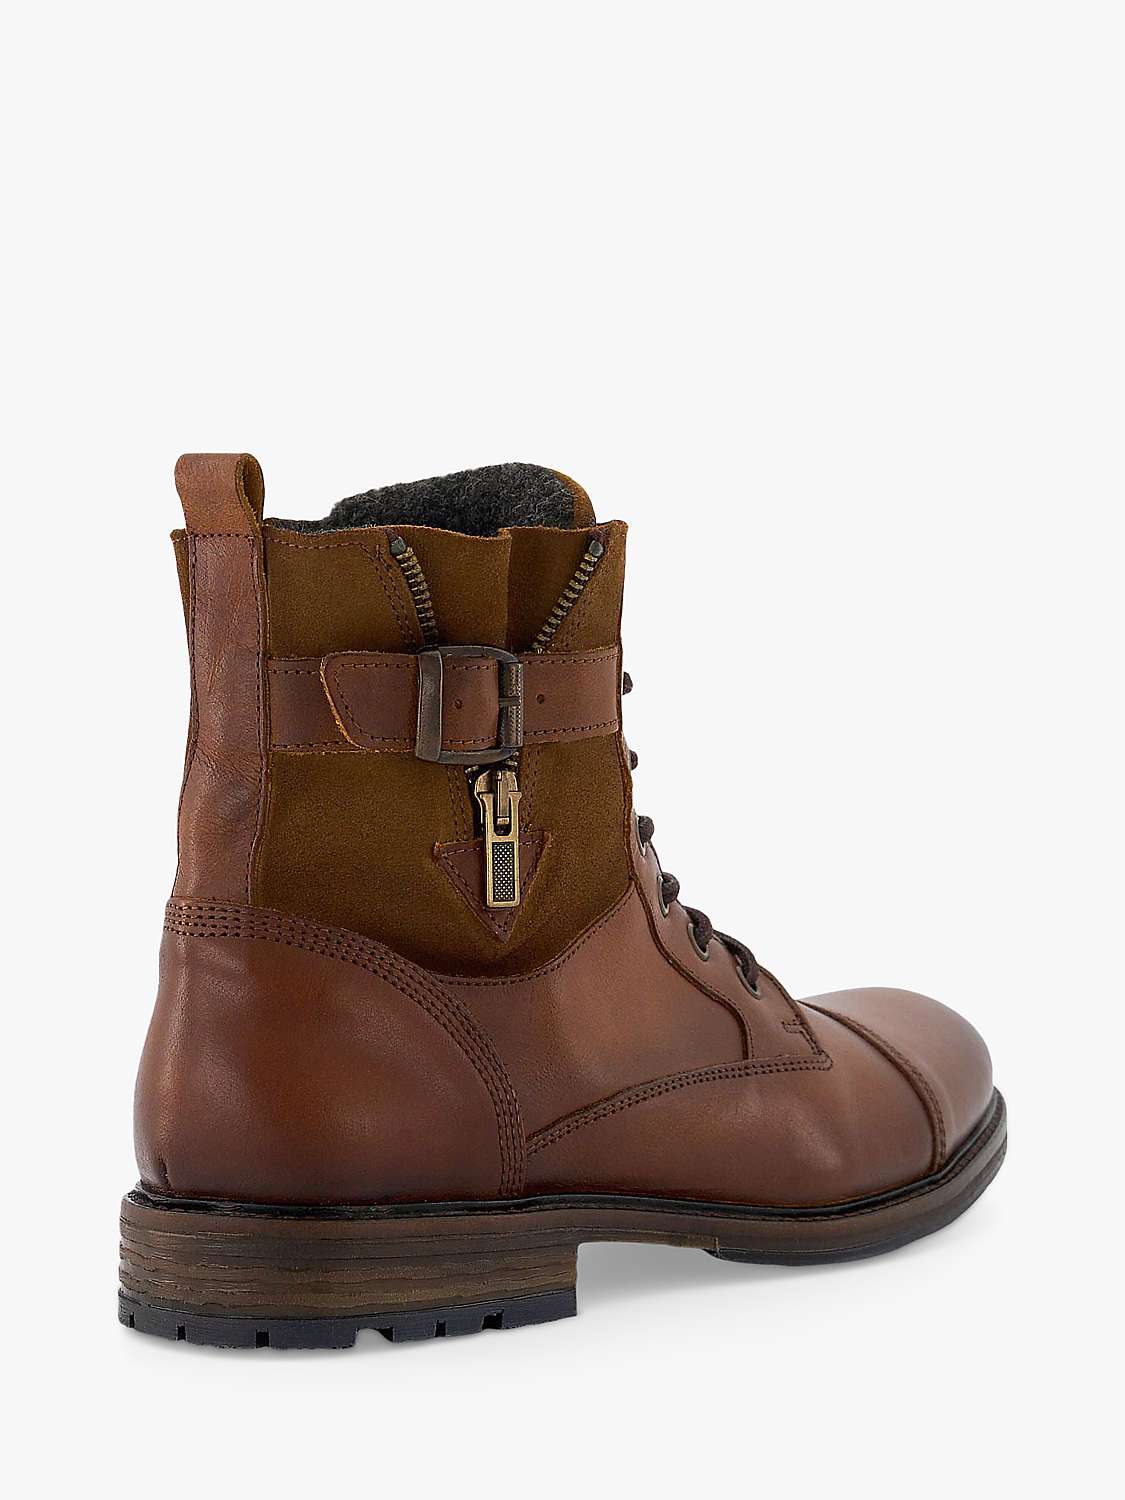 Buy Dune Call Leather Ankle Boots, Tan Online at johnlewis.com